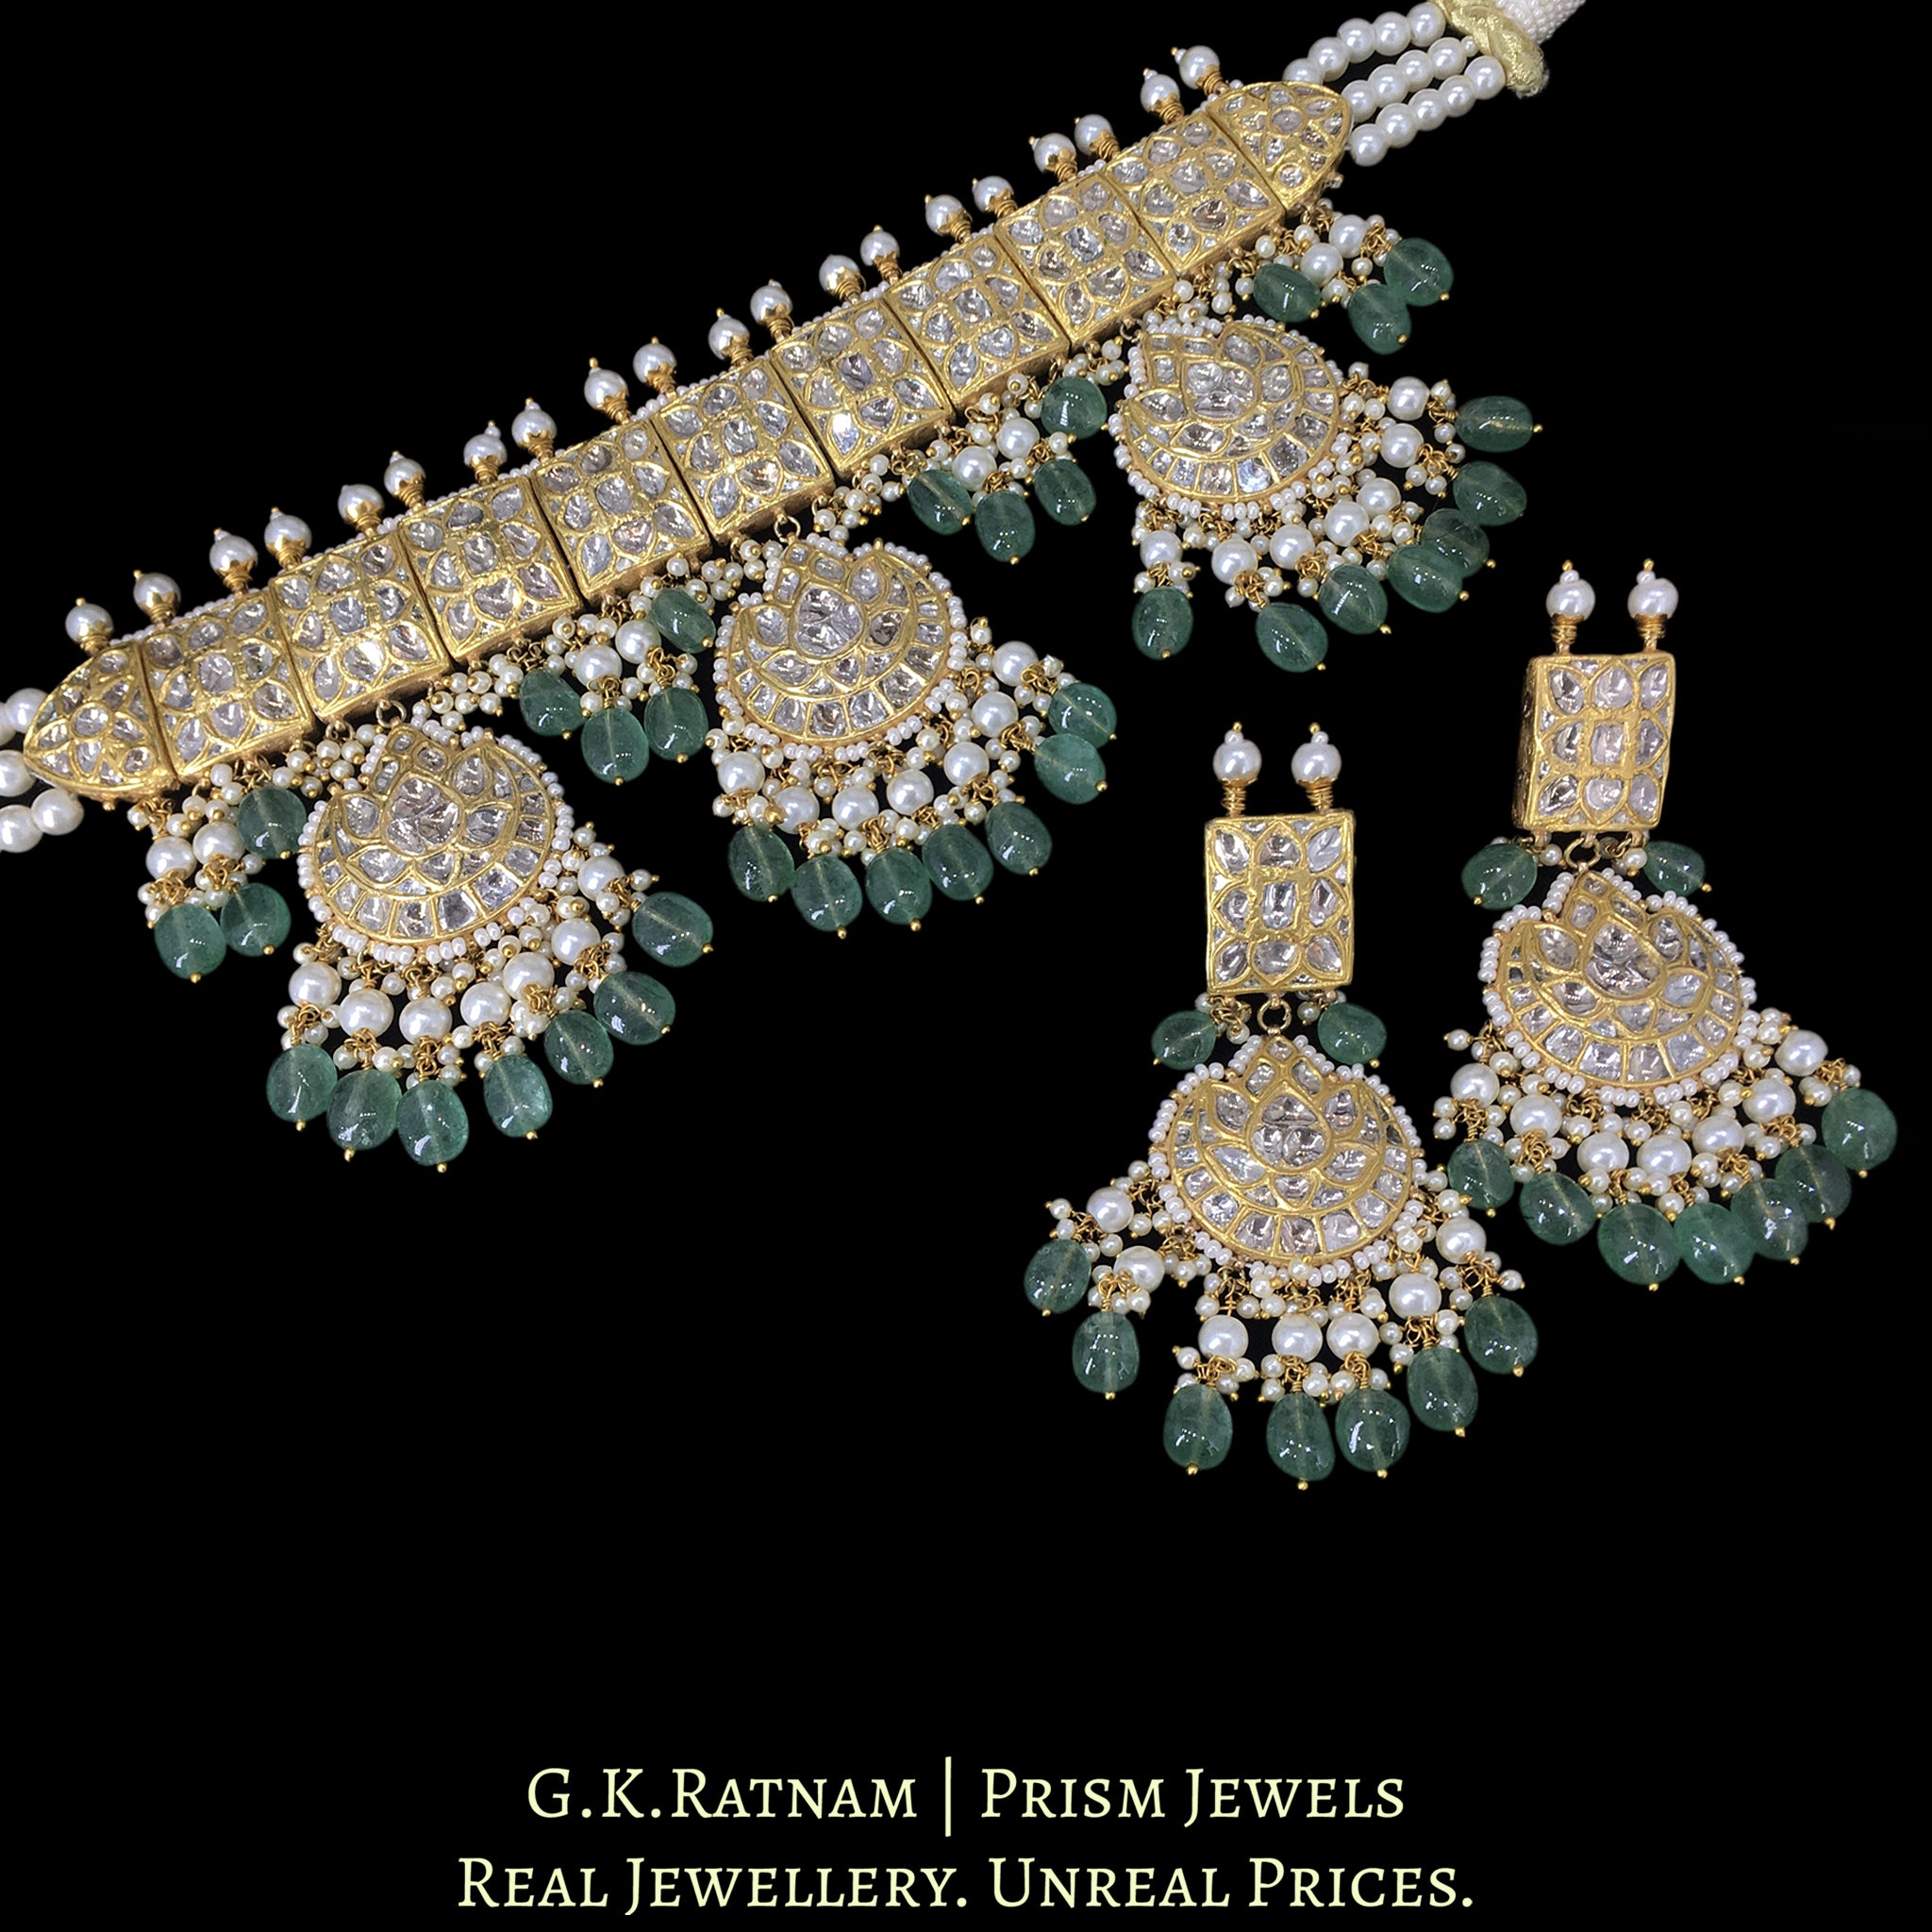 23k Gold and Diamond Polki Choker Necklace Set with Chand Hangings